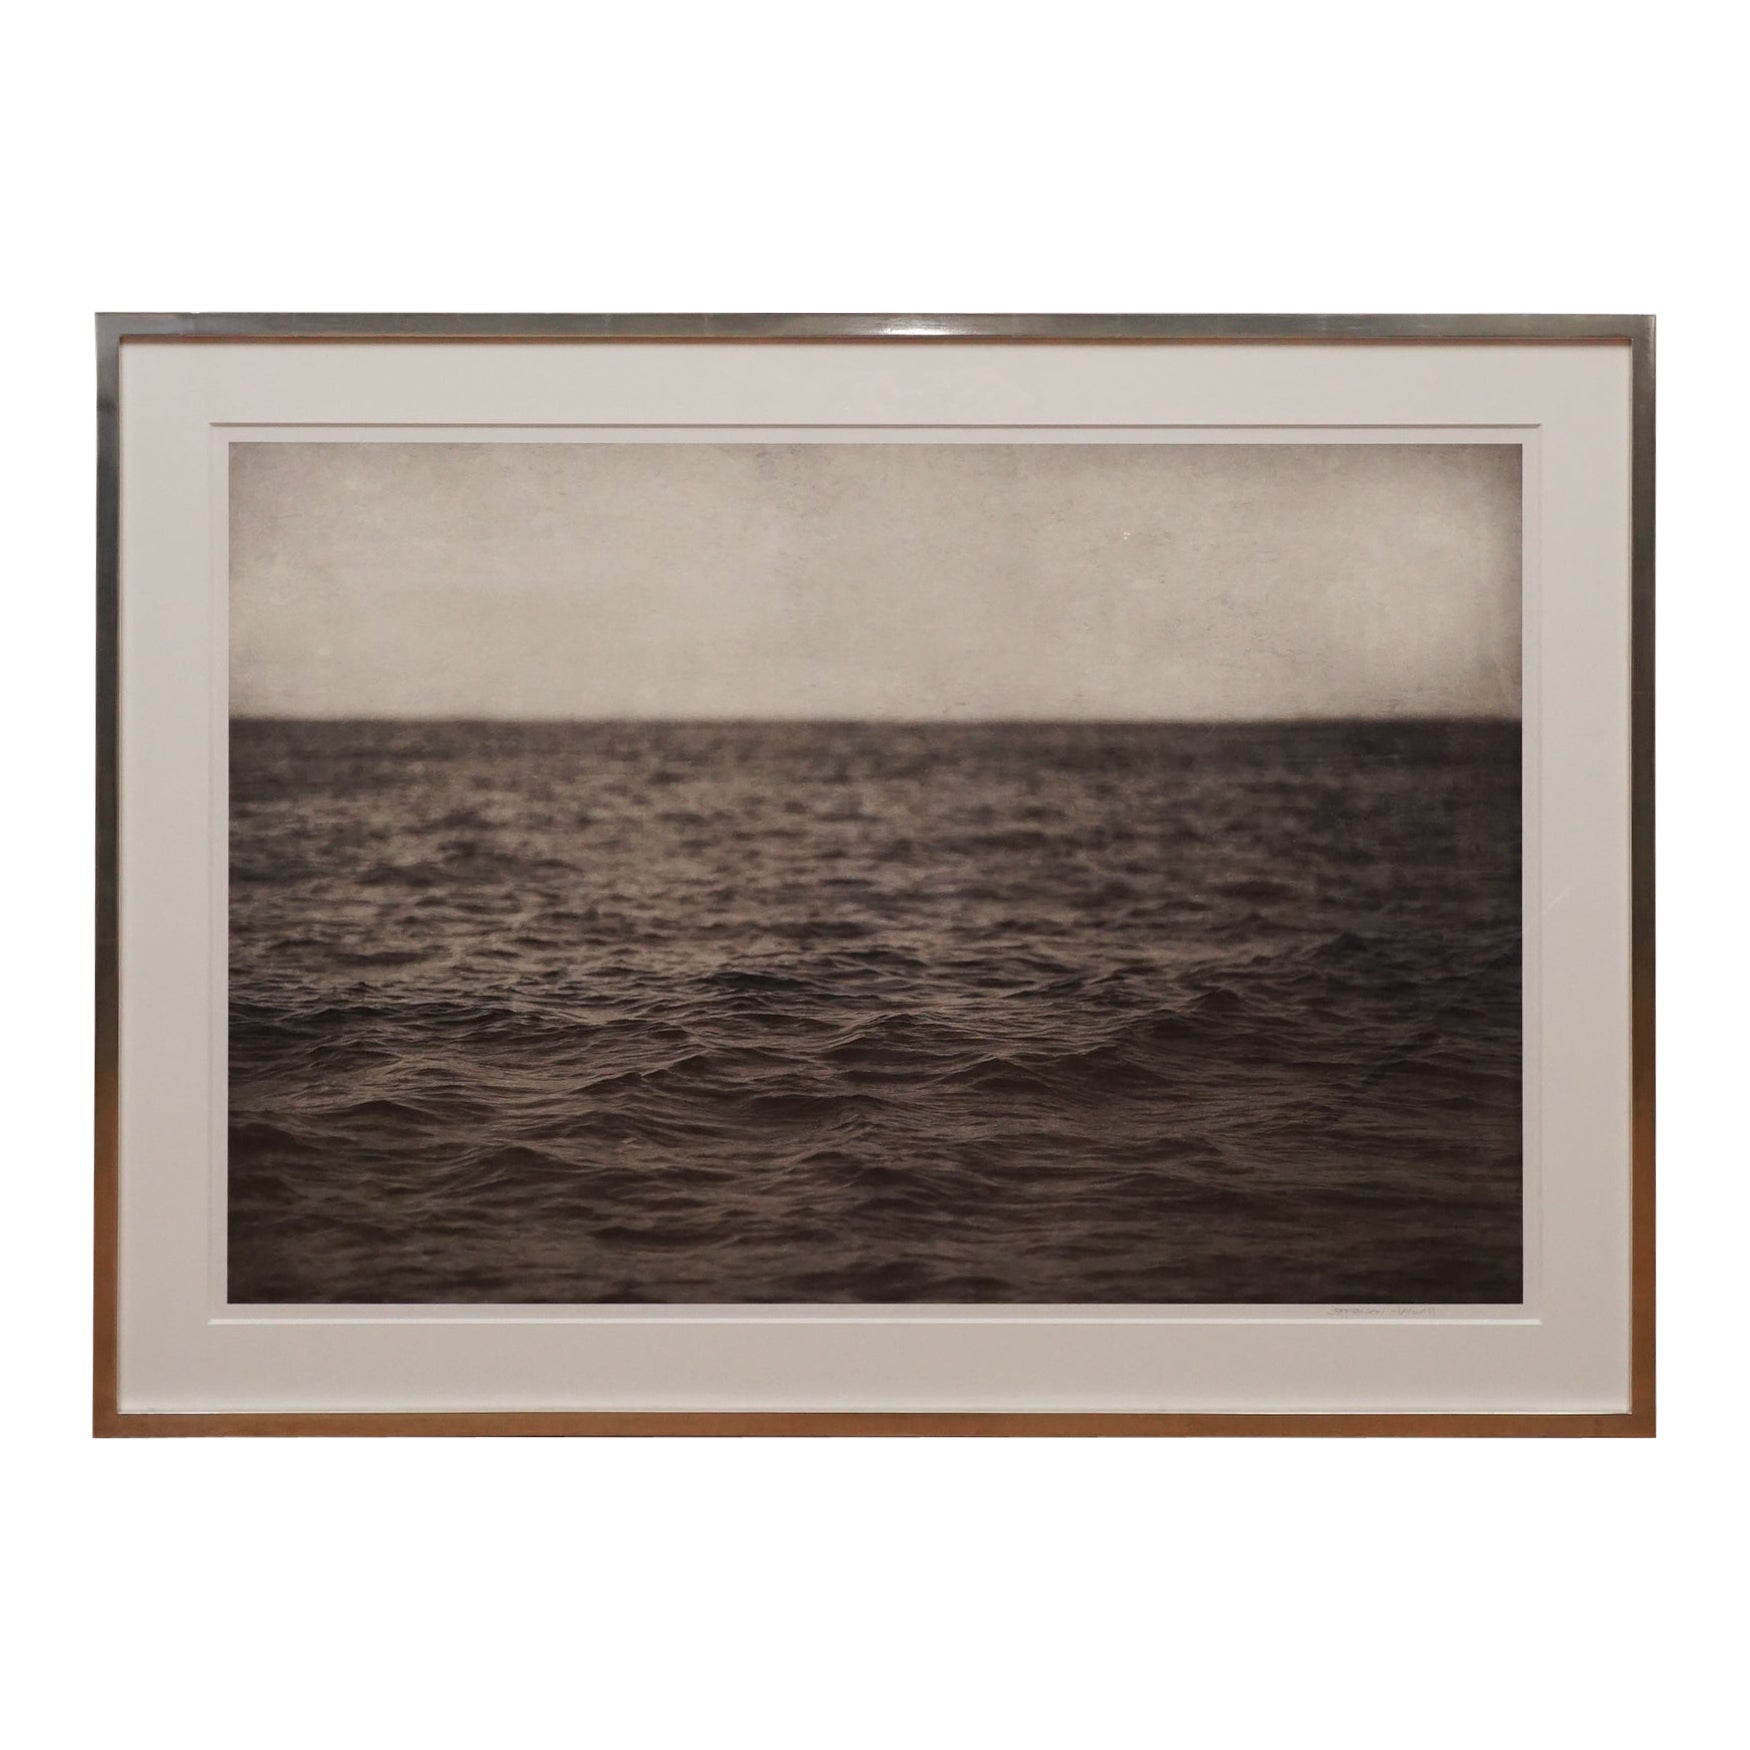 Jefferson Hayman, "The Sound, " Signed/Numbered Pigment Print For Sale